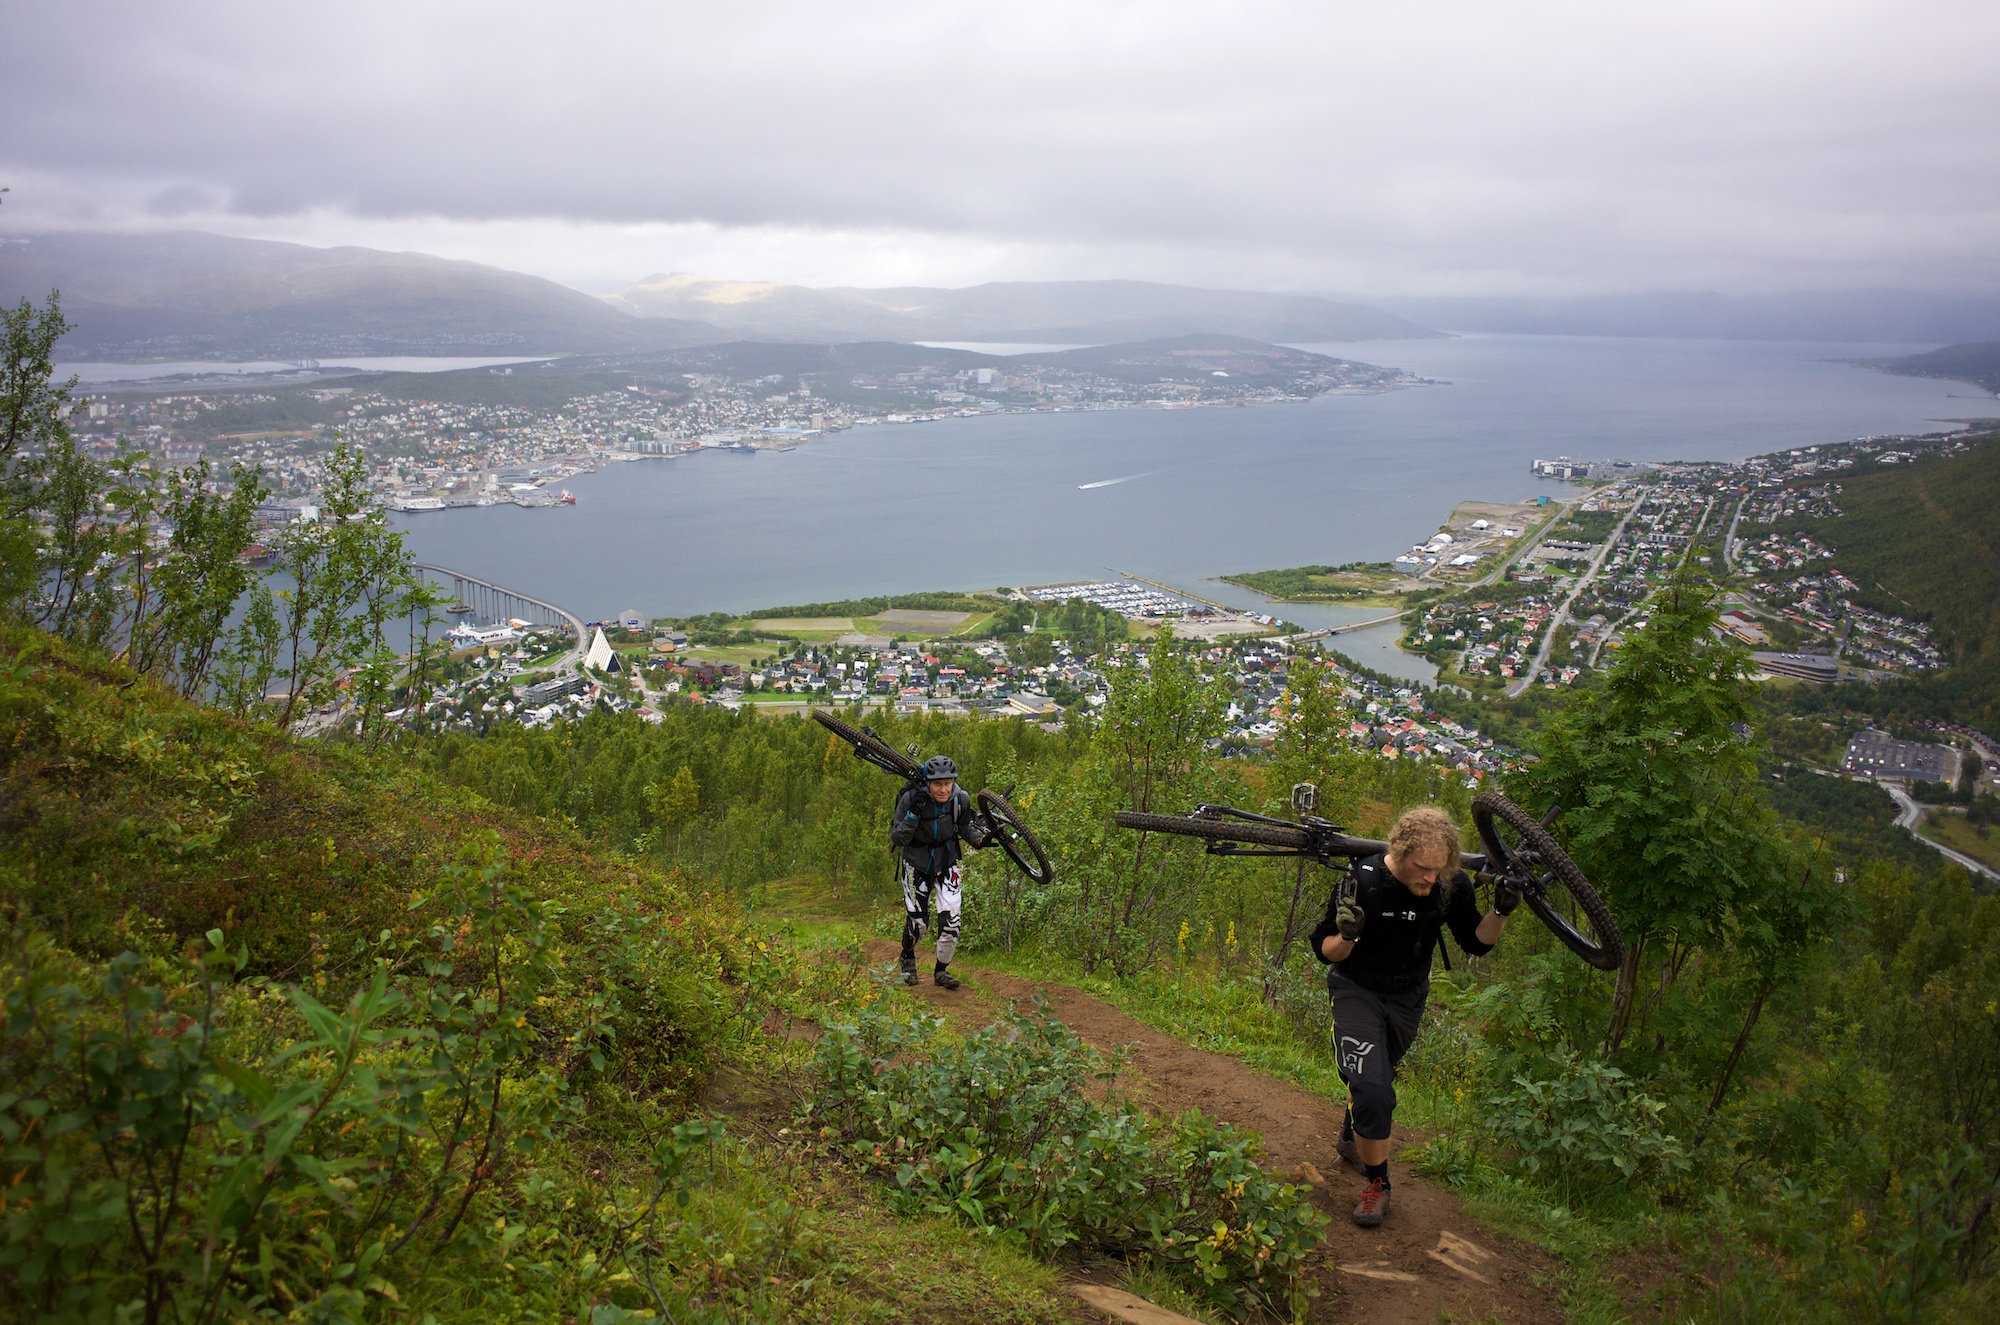 The climb up to Fjellheissen is steep but very efficient.